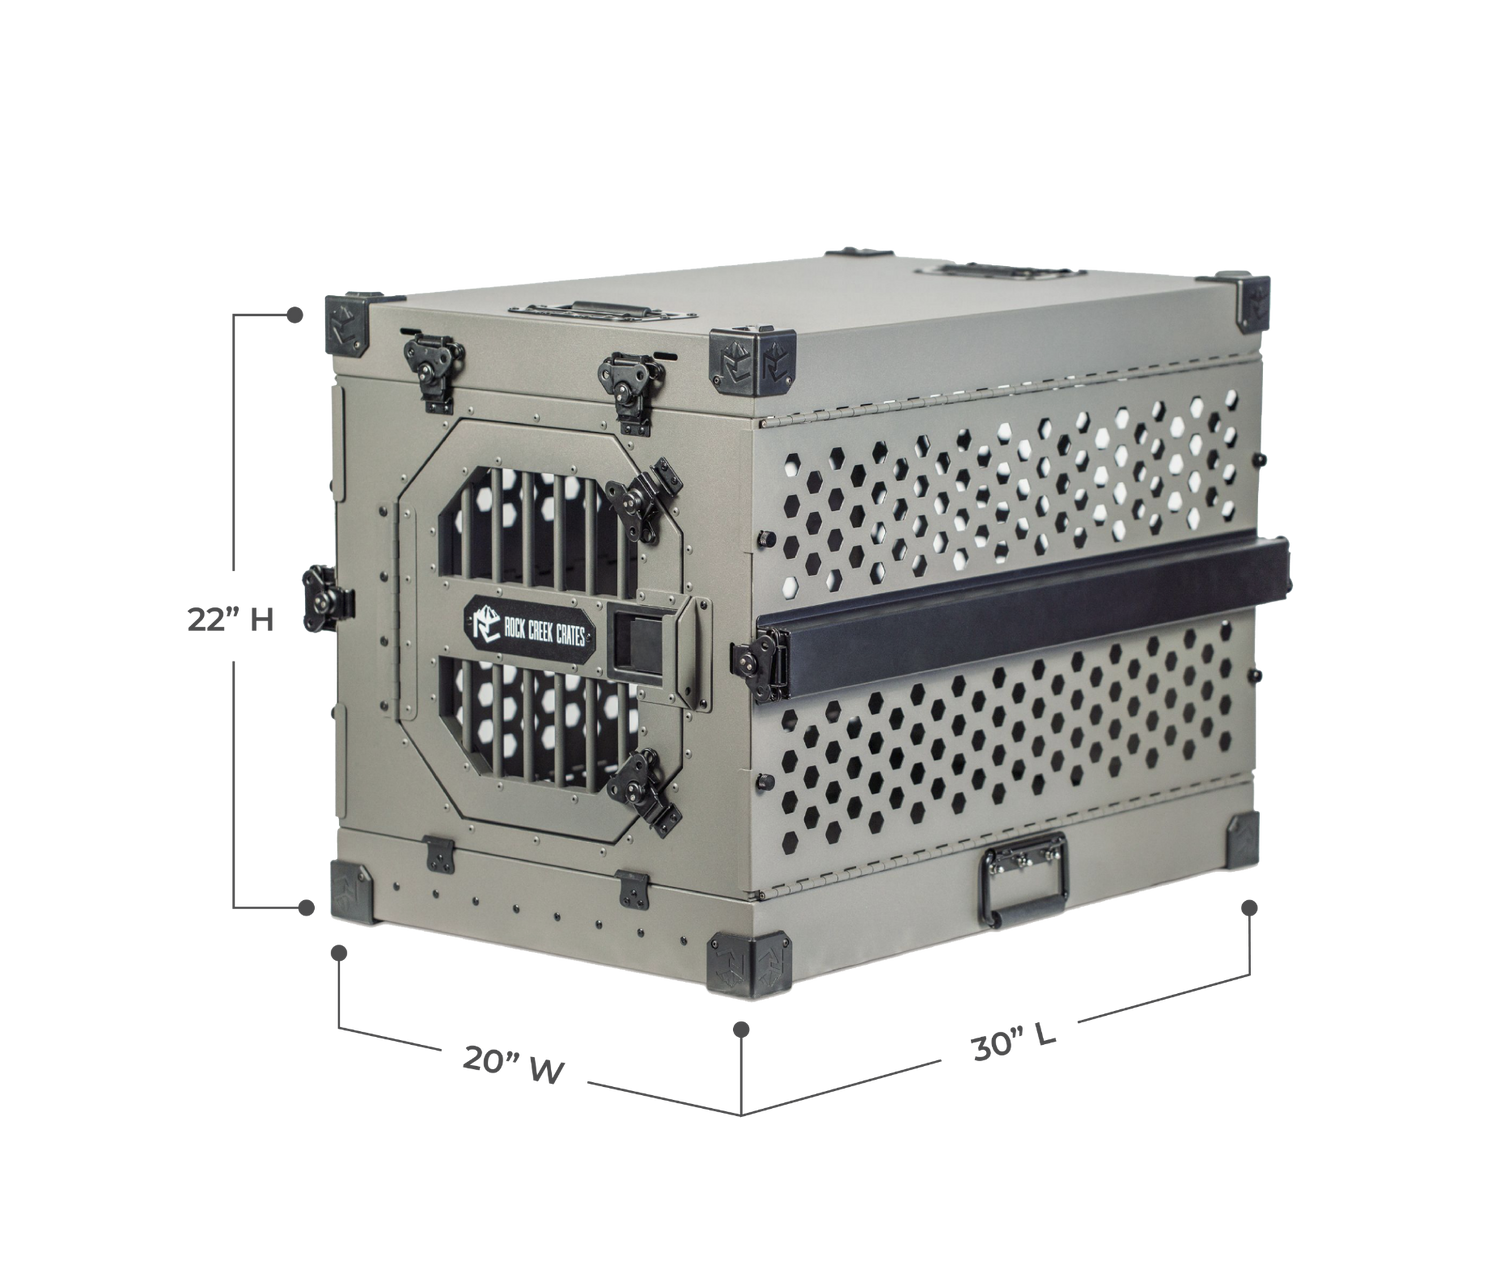 Medium-sized collapsible dog crate by Rock Creek Crates showing external dimensions